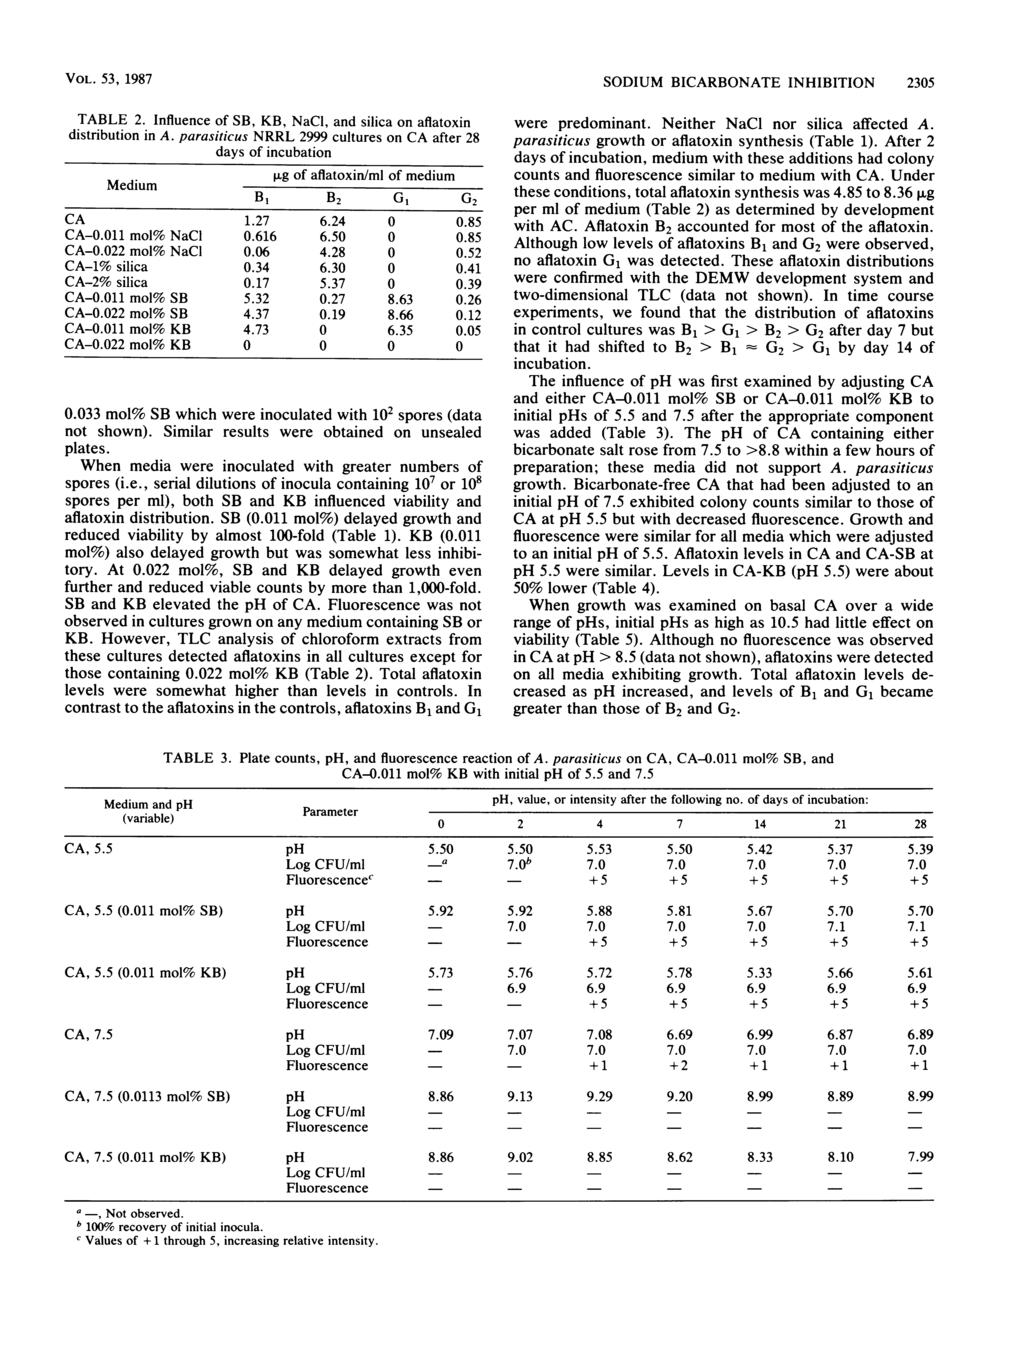 VOL. 53, 1987 TABLE 2. Influence of SB, KB, NaCl, and silica on aflatoxin distribution in A.